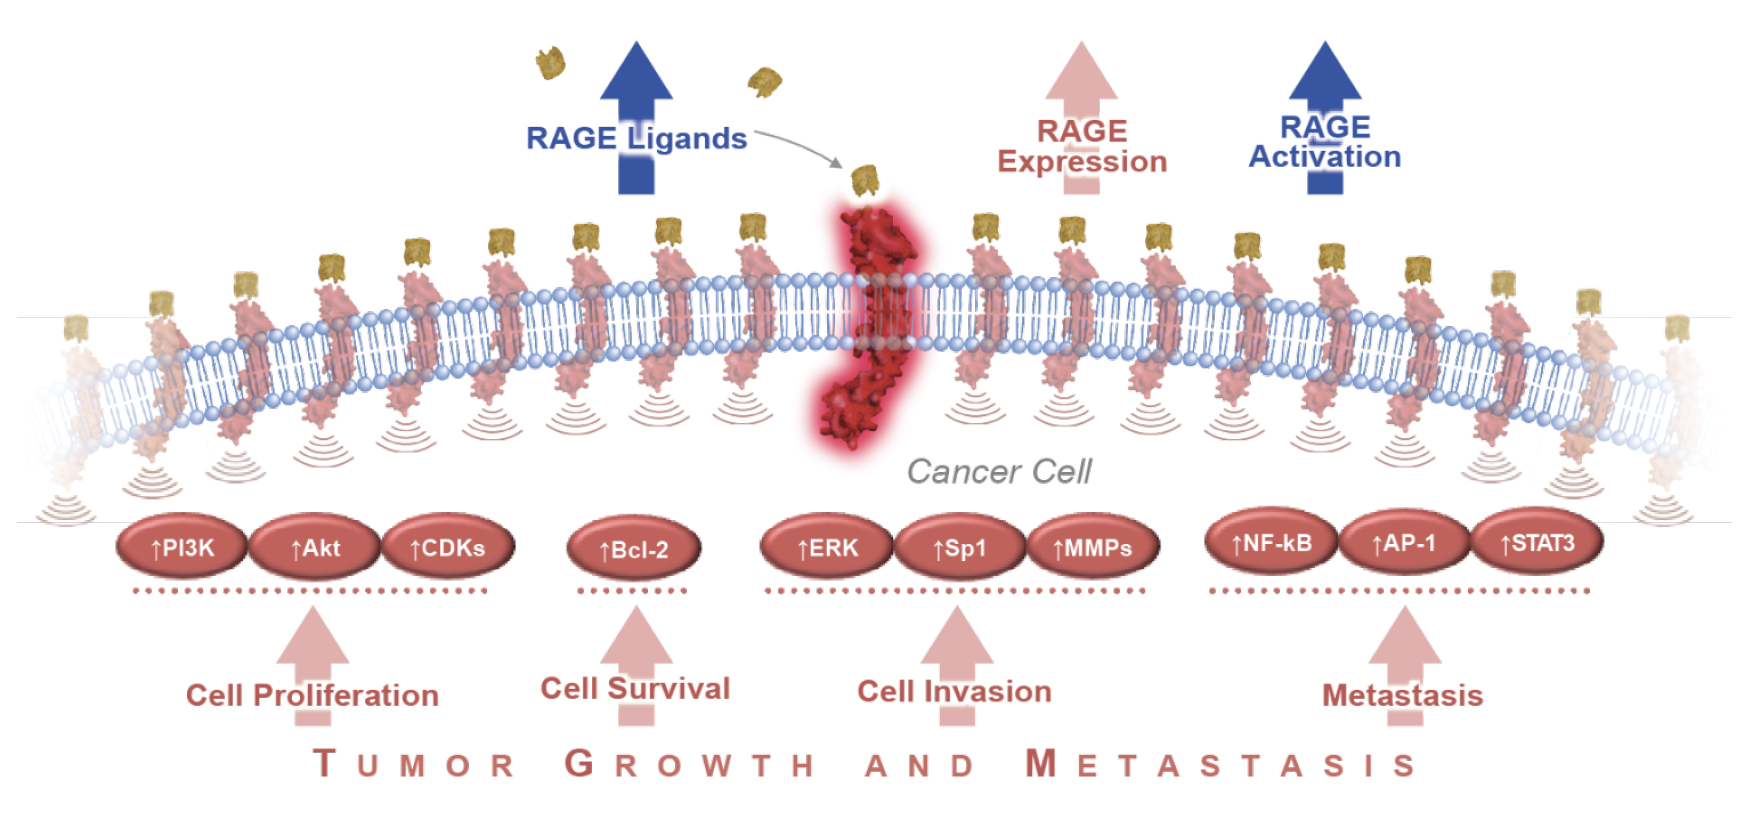 RAGE overactivation in CANCER